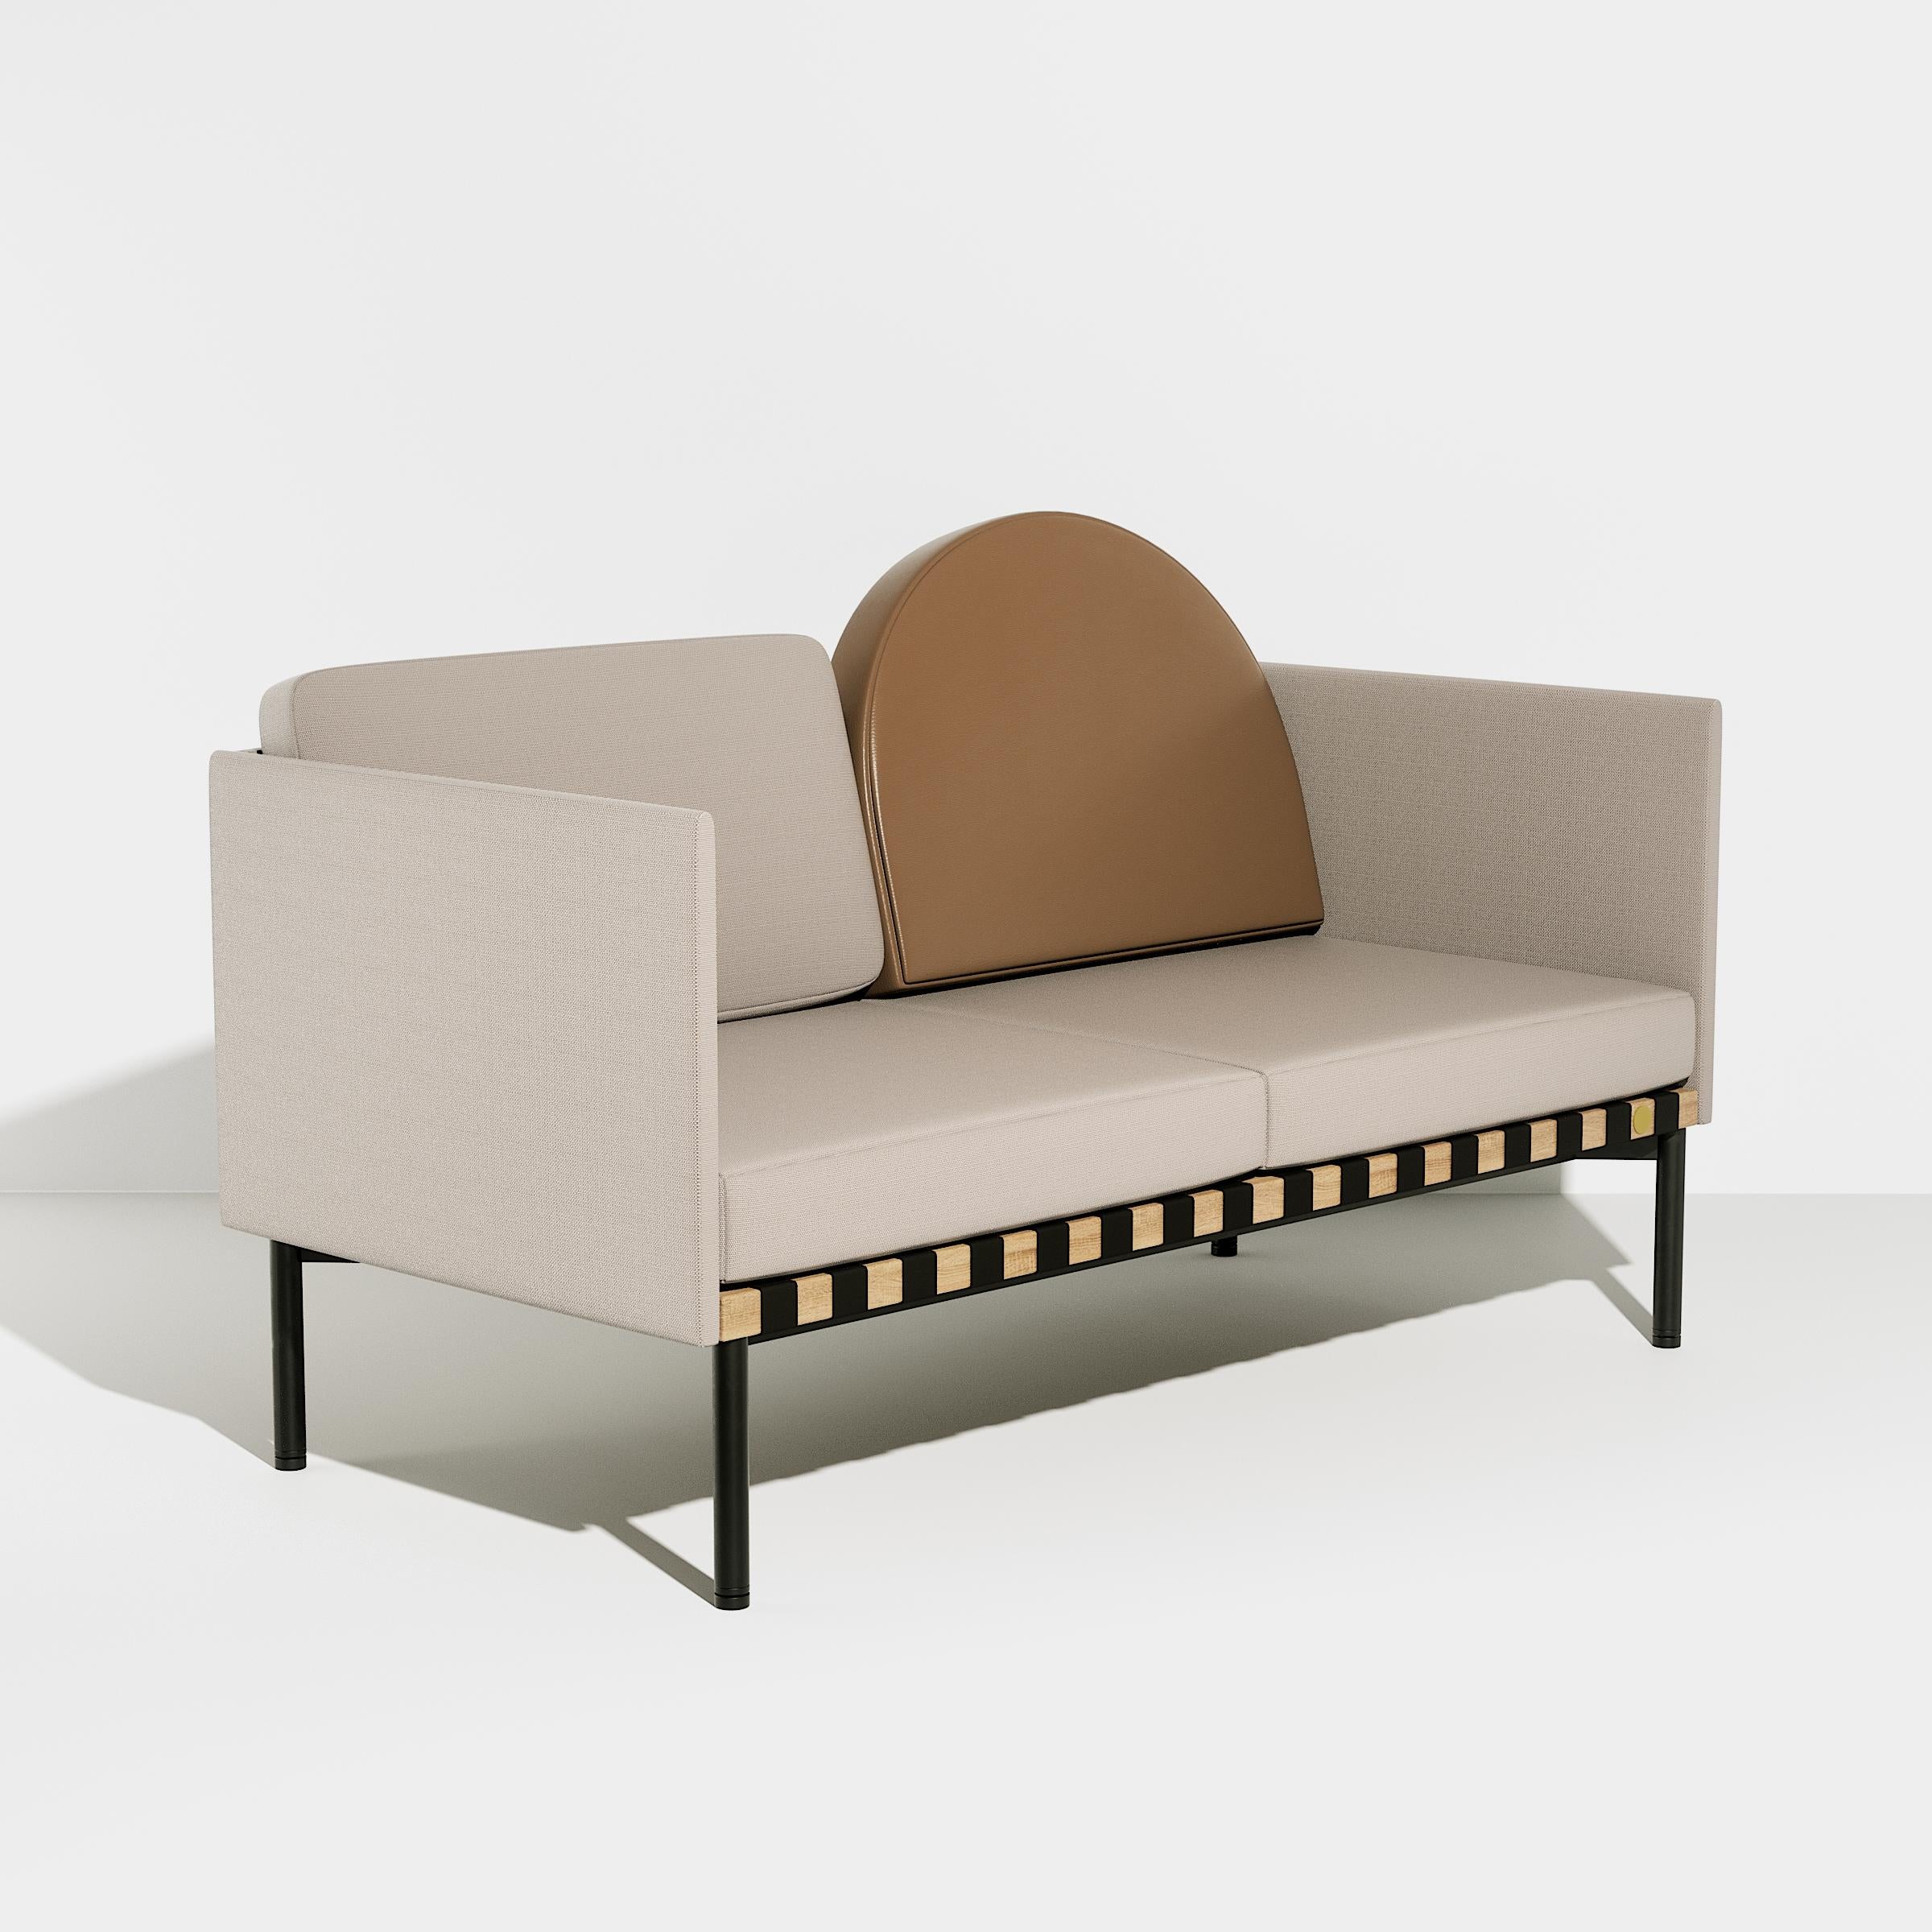 Petite Friture Grid 2 Seater Sofa with Armrest in Grey-beige by Studio Pool, 2015

Pool designed the Grid collection in reference to the Bauhaus style and in honour of the graphic talents. Each element of this all-modular system retains the